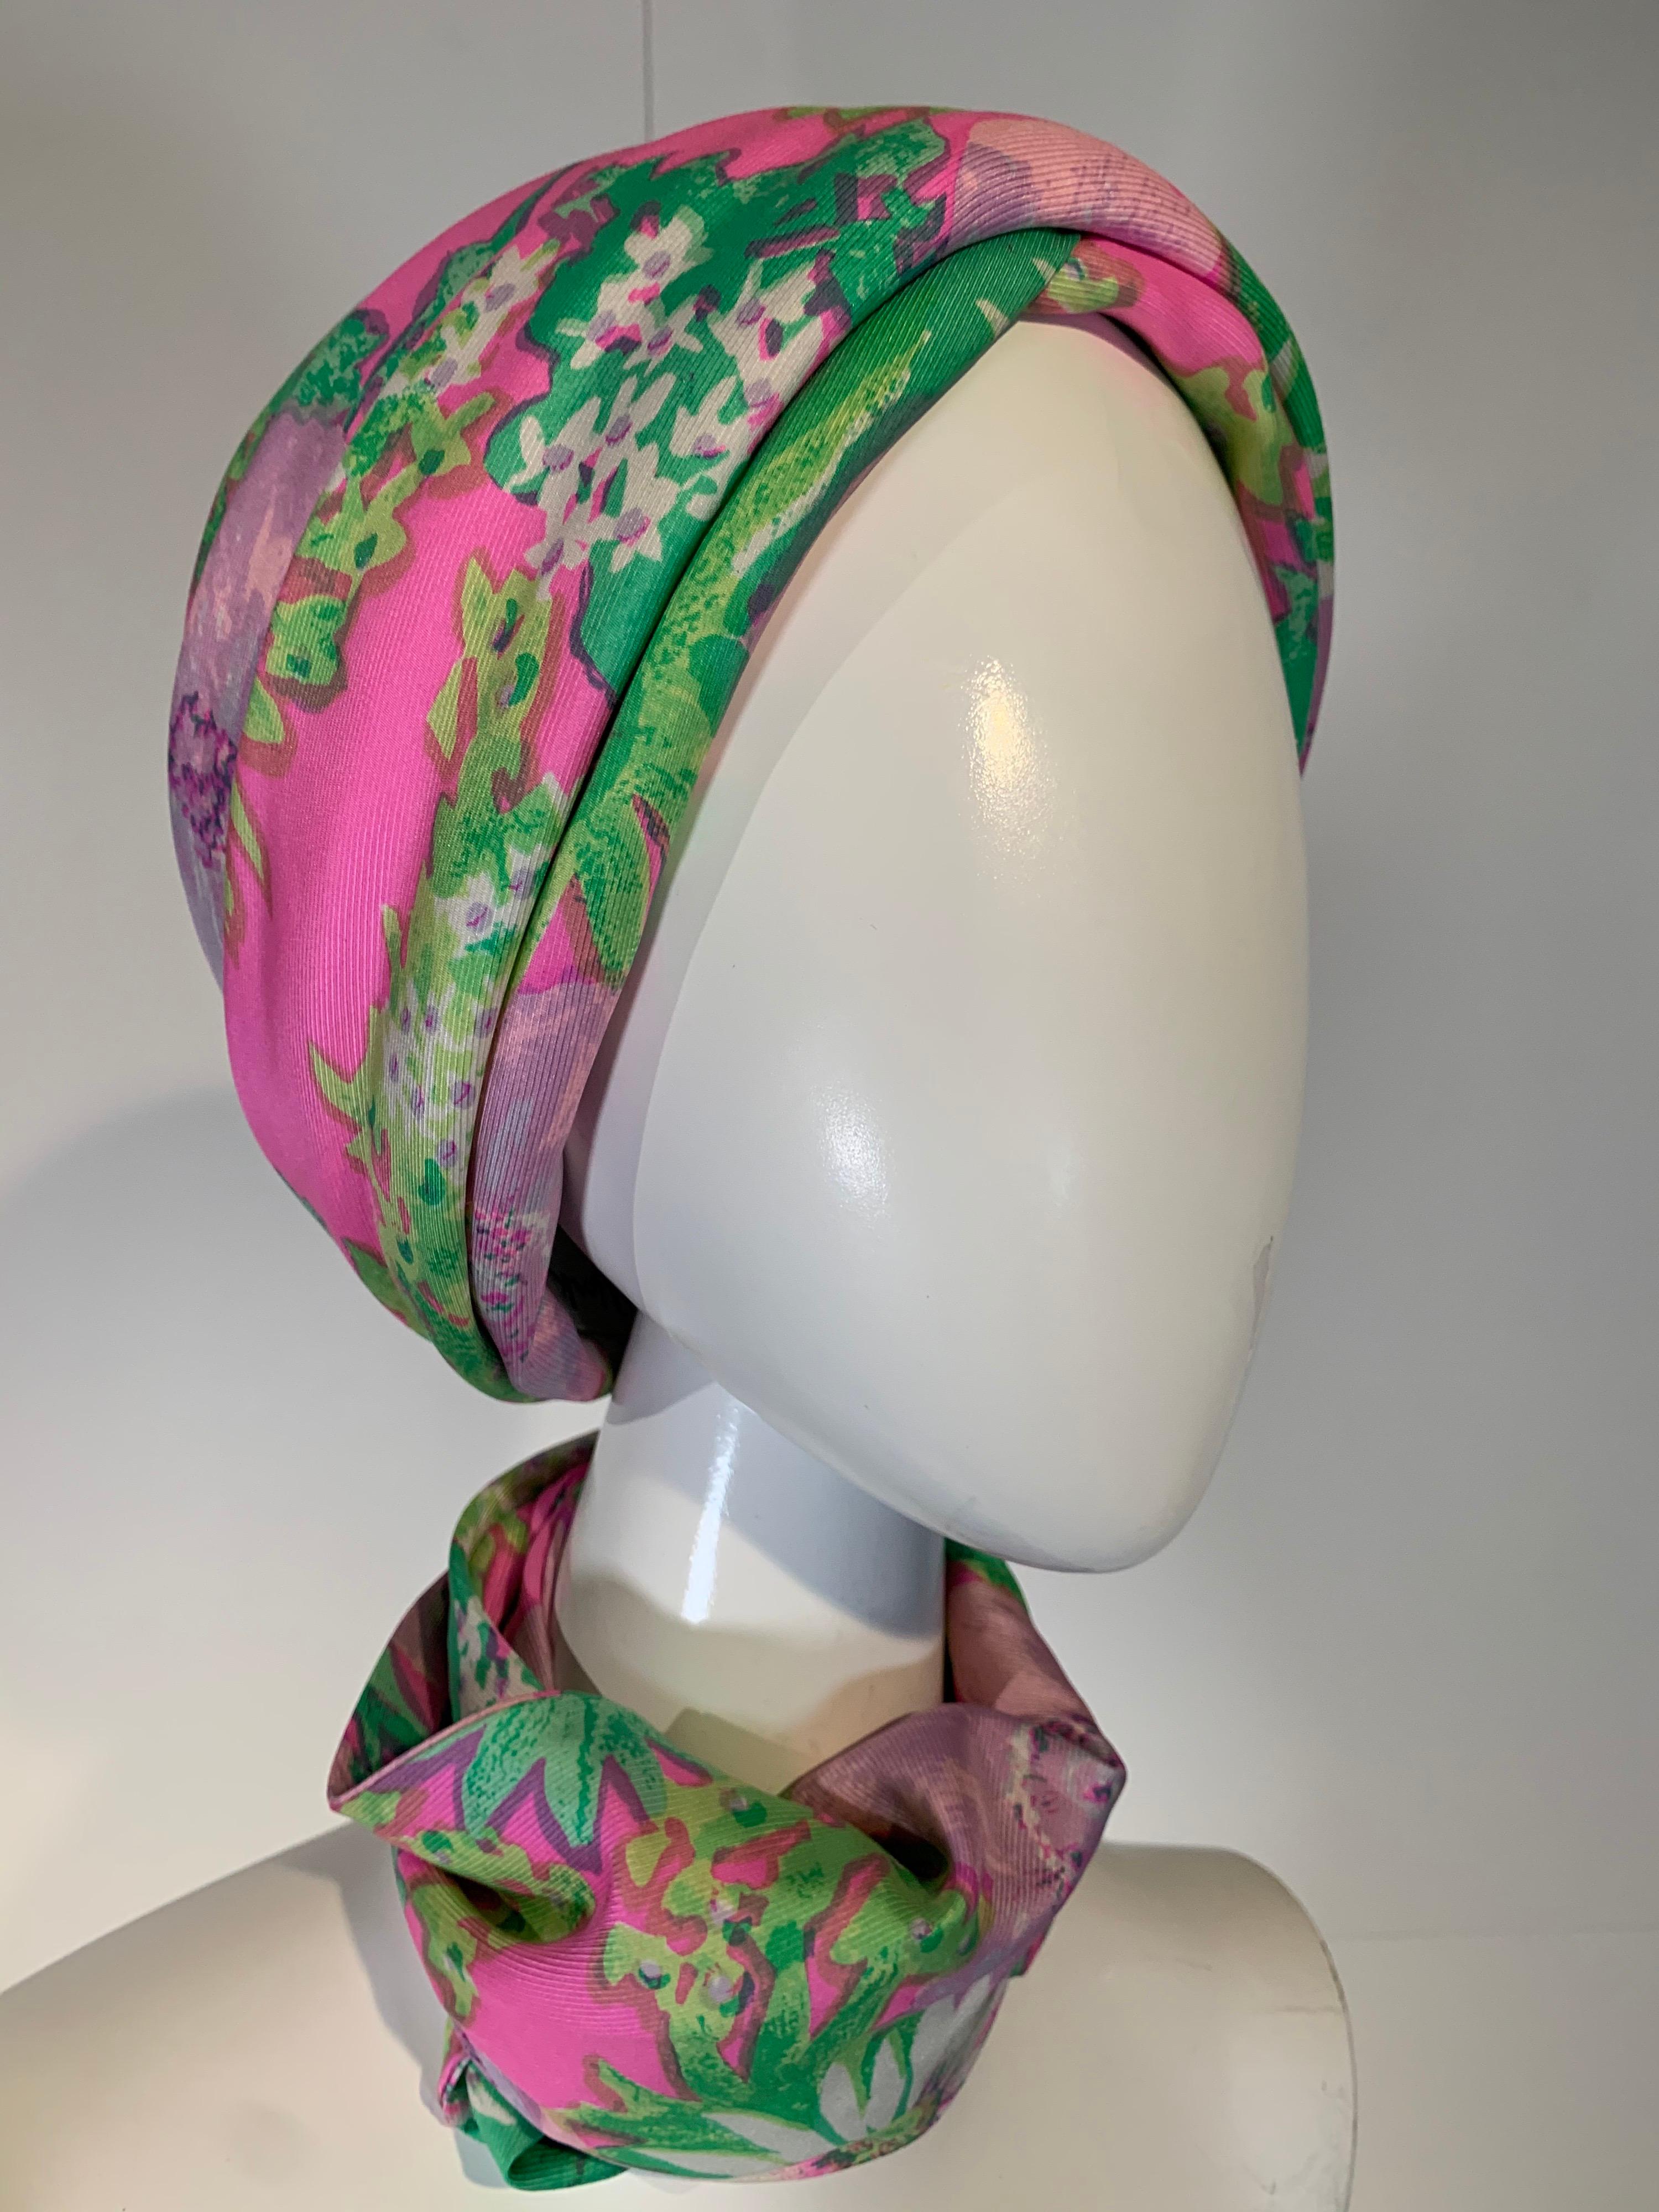 1960 Irene of New York fluorescent floral print turban hat and matching foulard / neck scarf ensemble: In shades of pink, lavender and green. Size Medium. Originally sold at I. Magnin. 